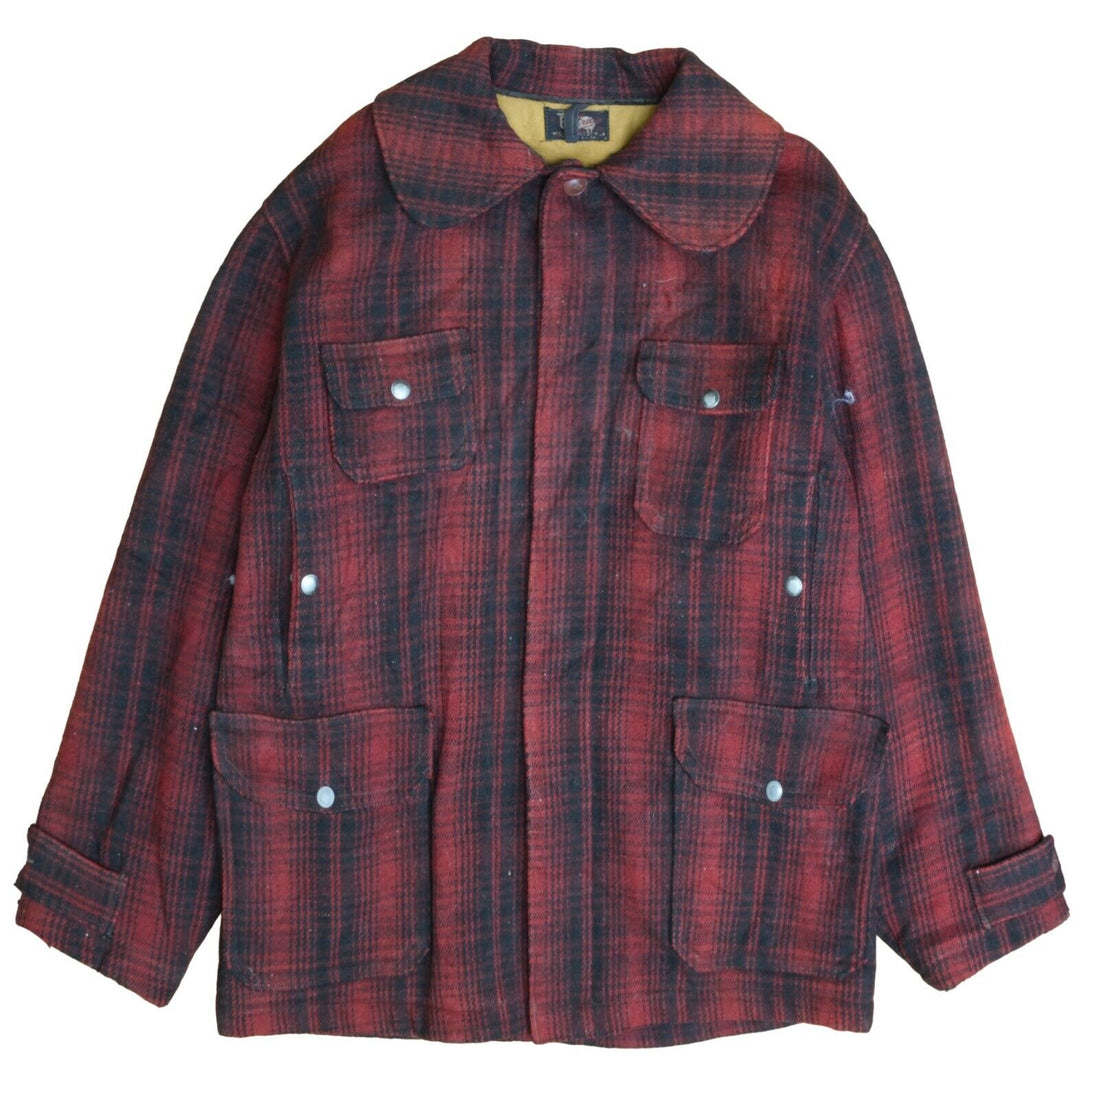 Vintage Woolrich Mackinaw Hunting Wool Coat Jacket Size Large Red Plaid 30s 40s